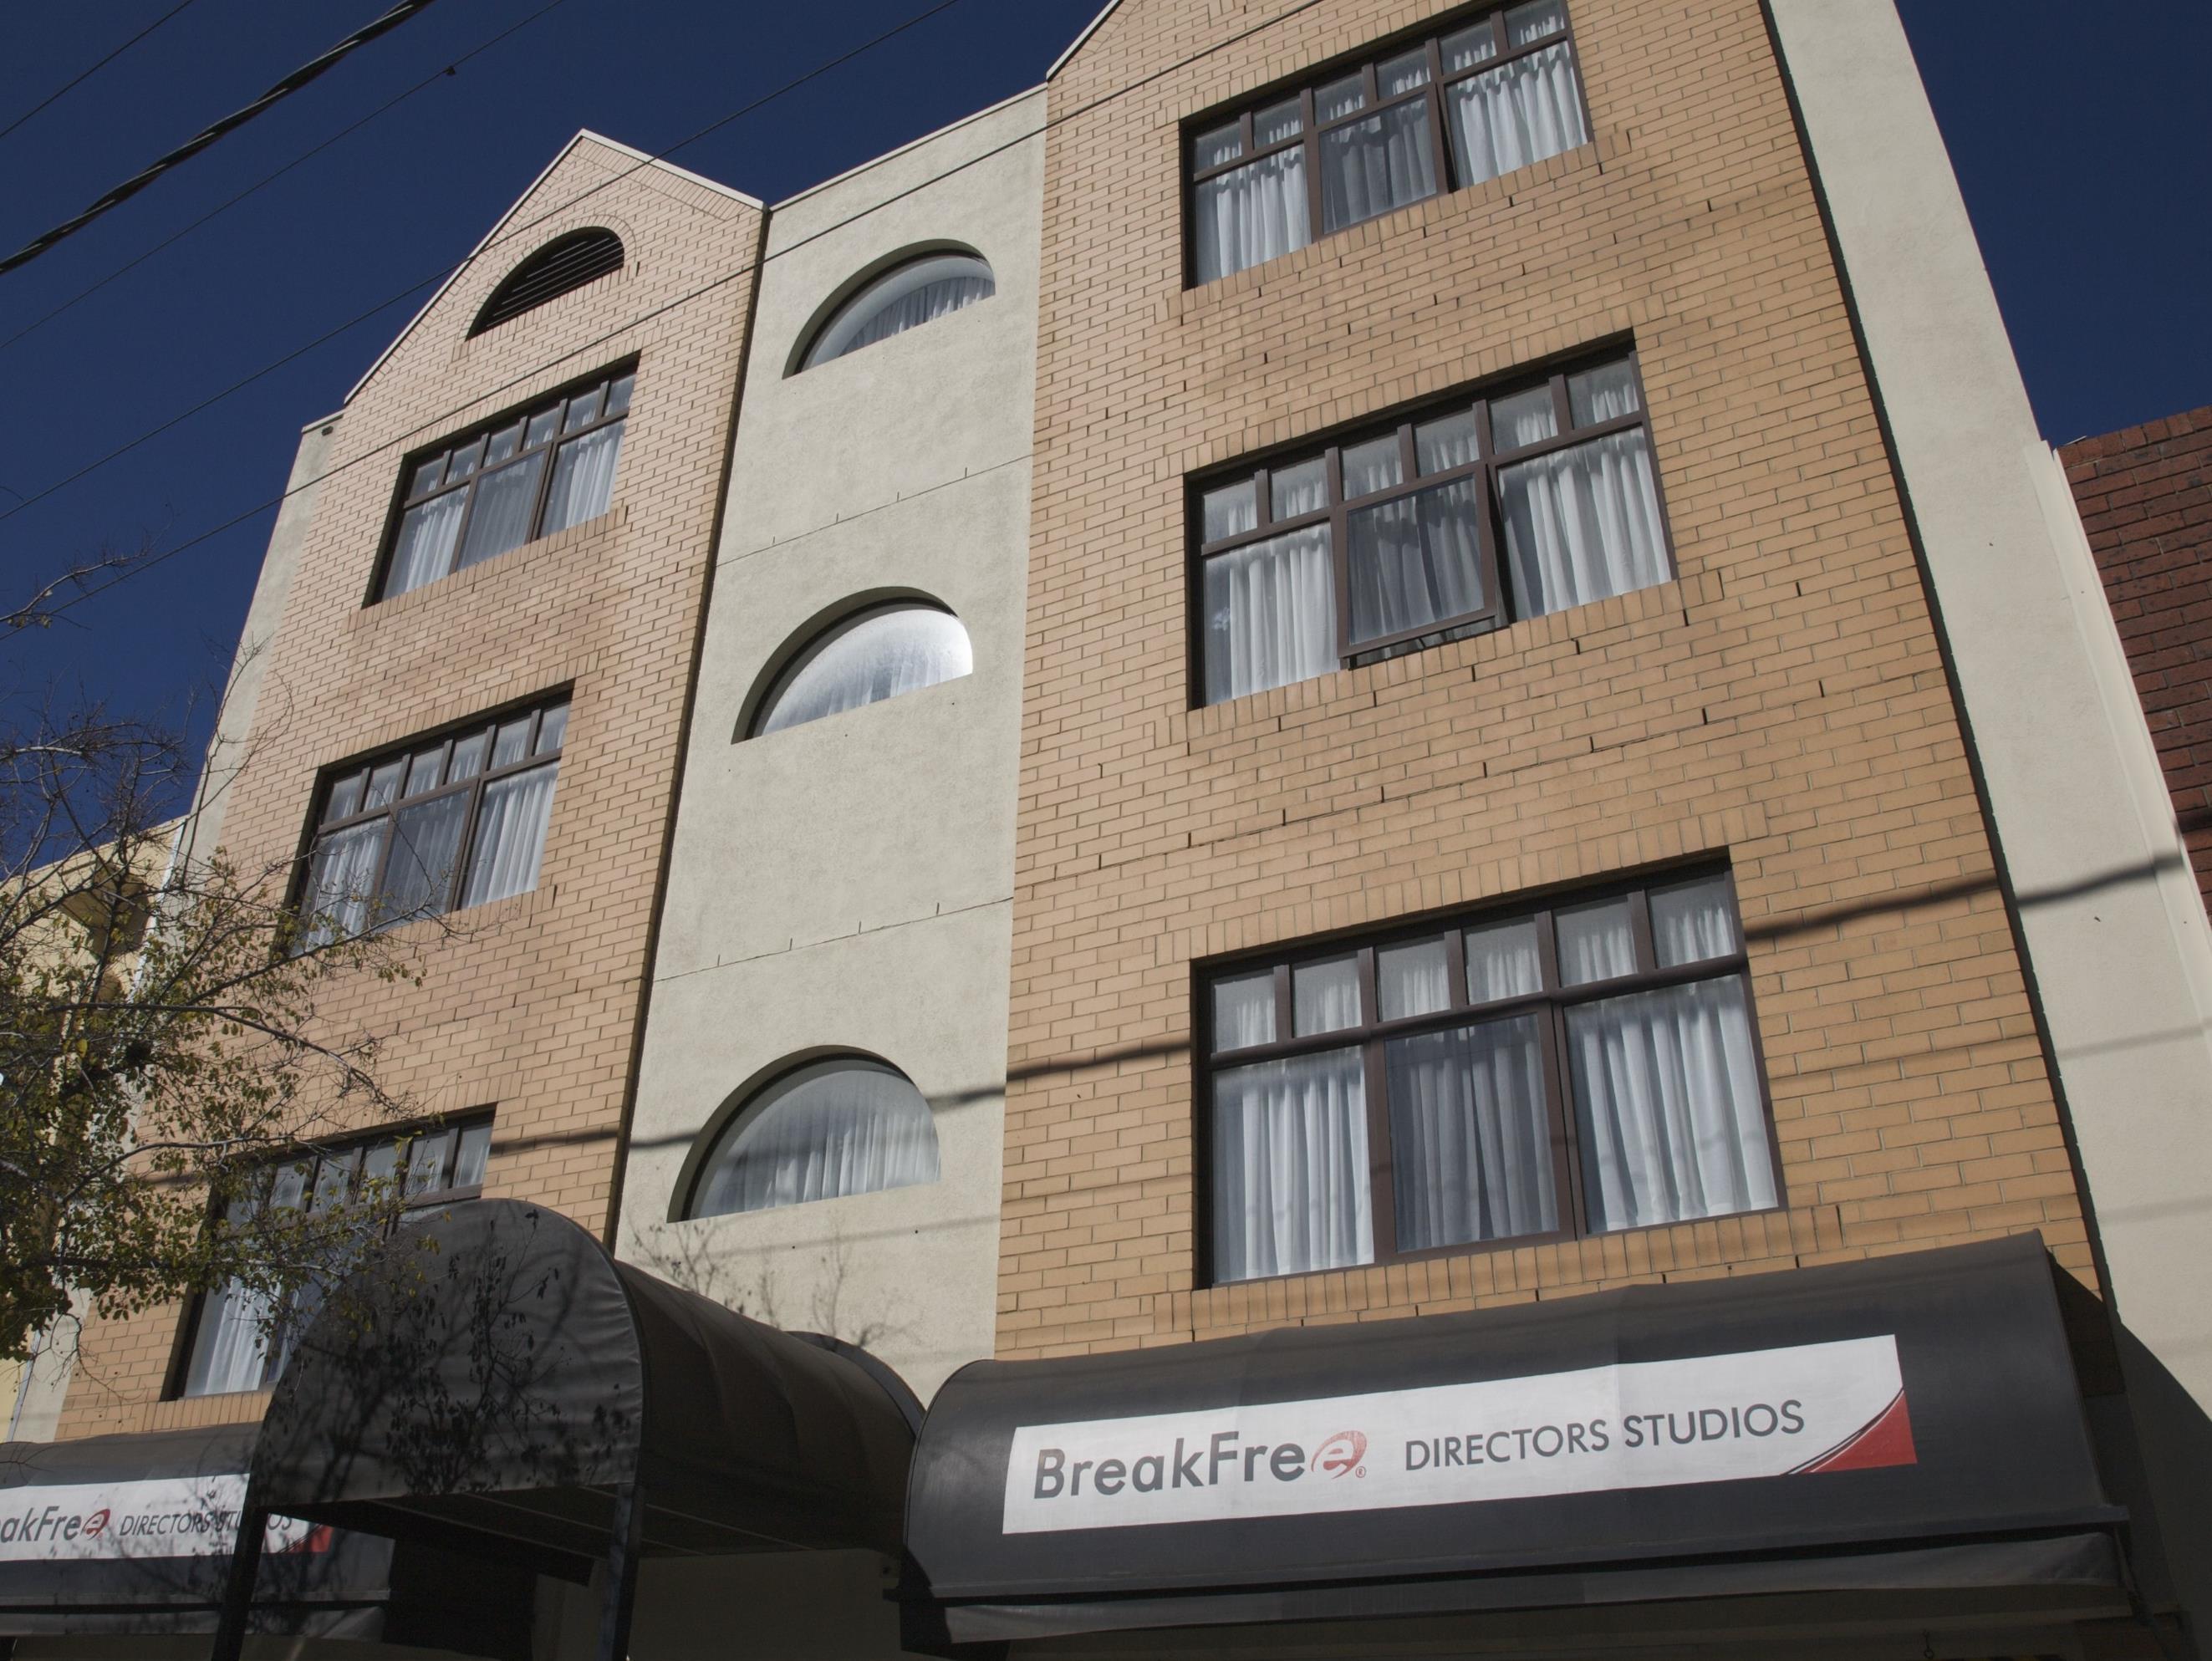 BreakFree Directors Studios Hotel Adelaide FAQ 2016, What facilities are there in BreakFree Directors Studios Hotel Adelaide 2016, What Languages Spoken are Supported in BreakFree Directors Studios Hotel Adelaide 2016, Which payment cards are accepted in BreakFree Directors Studios Hotel Adelaide , Adelaide BreakFree Directors Studios Hotel room facilities and services Q&A 2016, Adelaide BreakFree Directors Studios Hotel online booking services 2016, Adelaide BreakFree Directors Studios Hotel address 2016, Adelaide BreakFree Directors Studios Hotel telephone number 2016,Adelaide BreakFree Directors Studios Hotel map 2016, Adelaide BreakFree Directors Studios Hotel traffic guide 2016, how to go Adelaide BreakFree Directors Studios Hotel, Adelaide BreakFree Directors Studios Hotel booking online 2016, Adelaide BreakFree Directors Studios Hotel room types 2016.